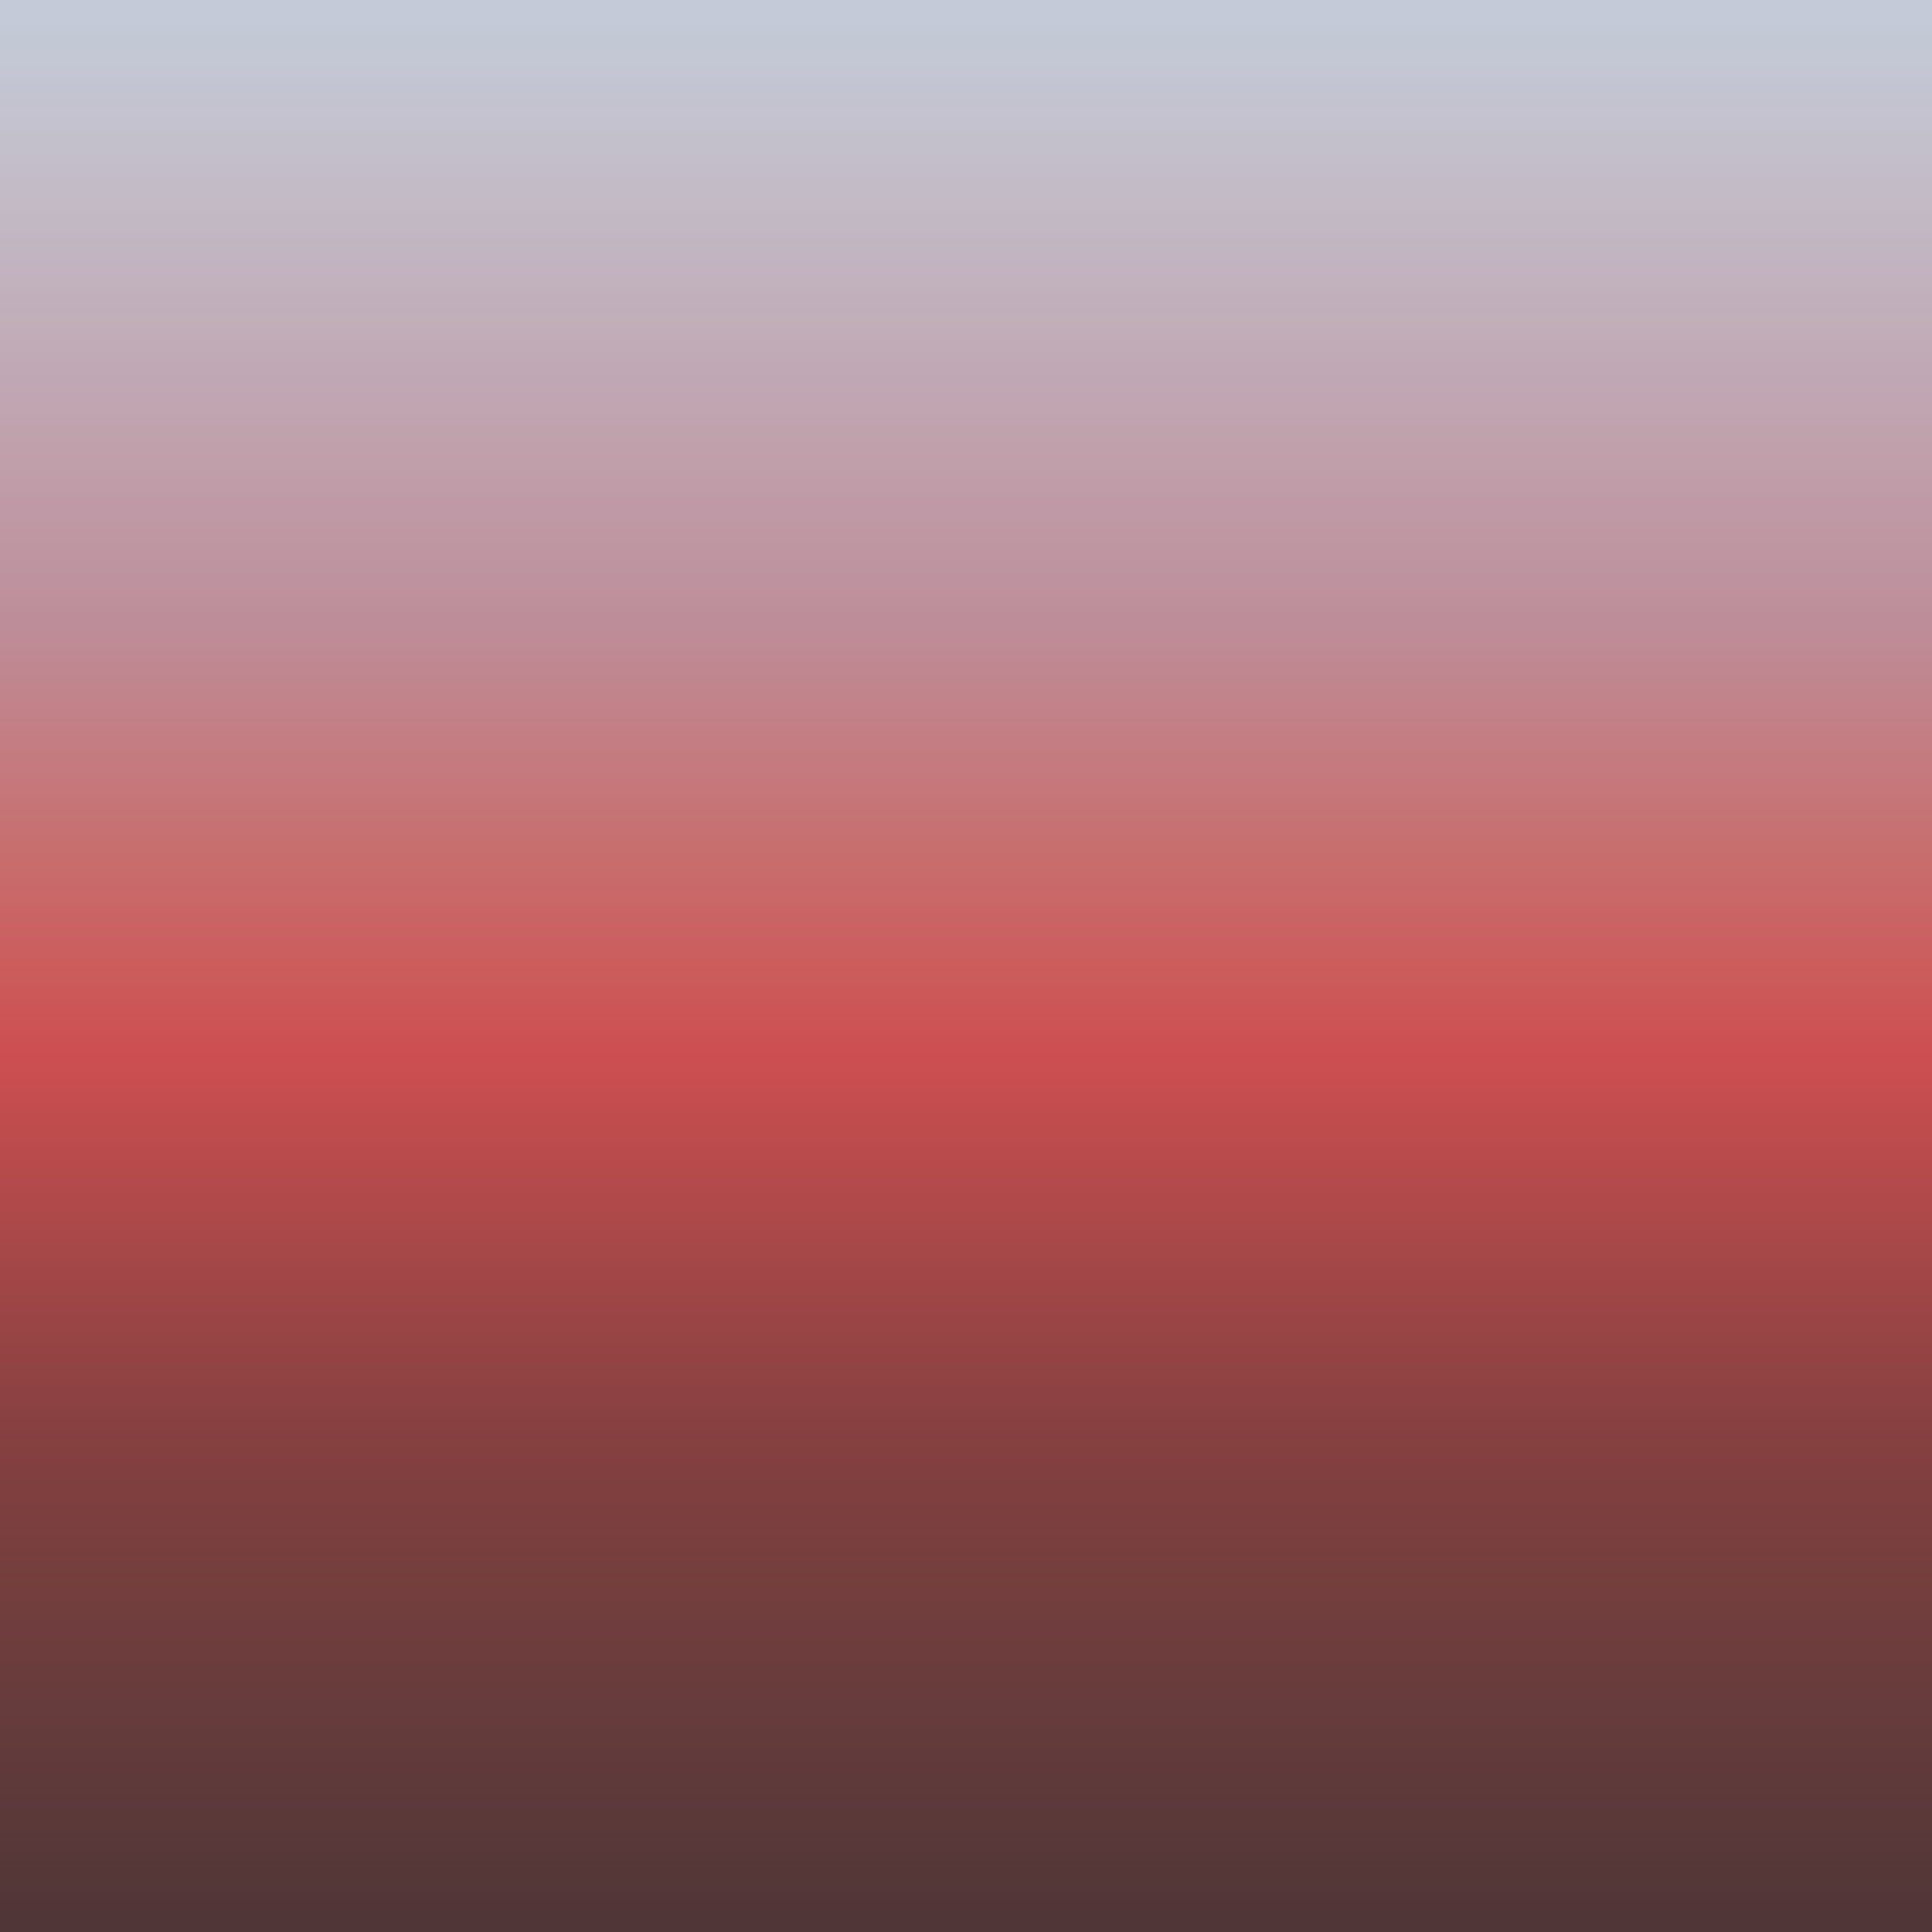 062320-19_Blur_Ombre_TerralonSmooth_062319-19-07 SUnrise.png